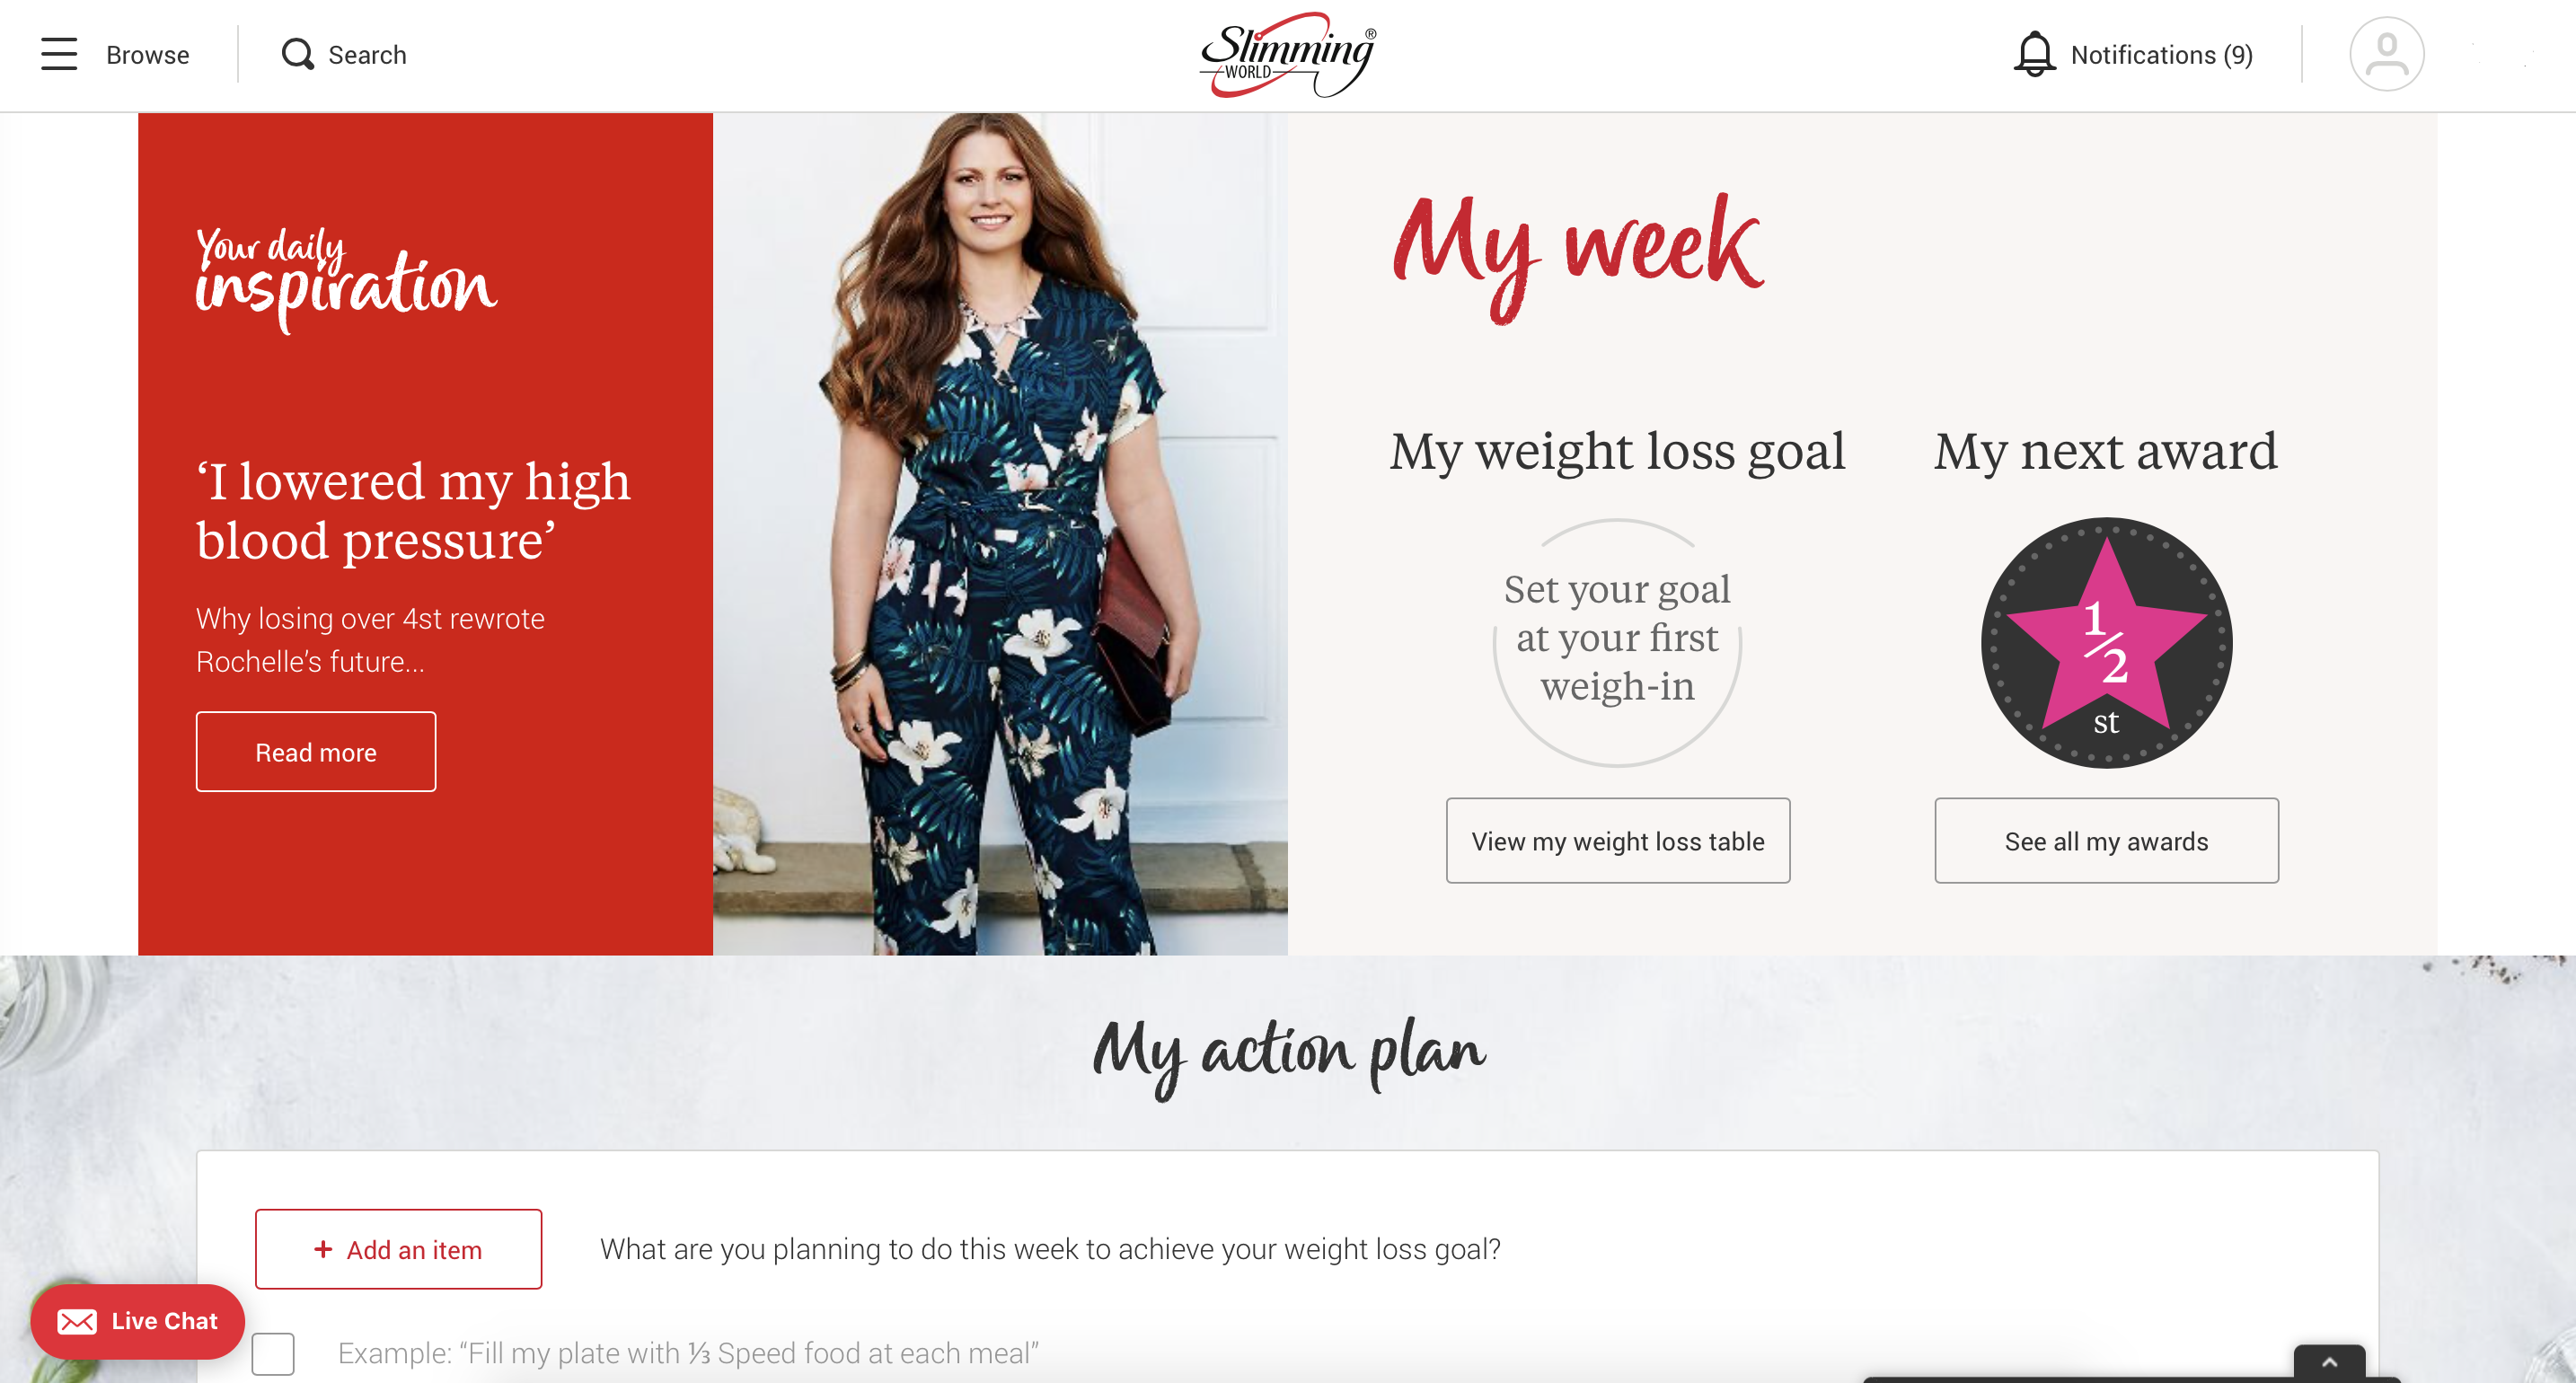 image of main page once logged into Slimming World